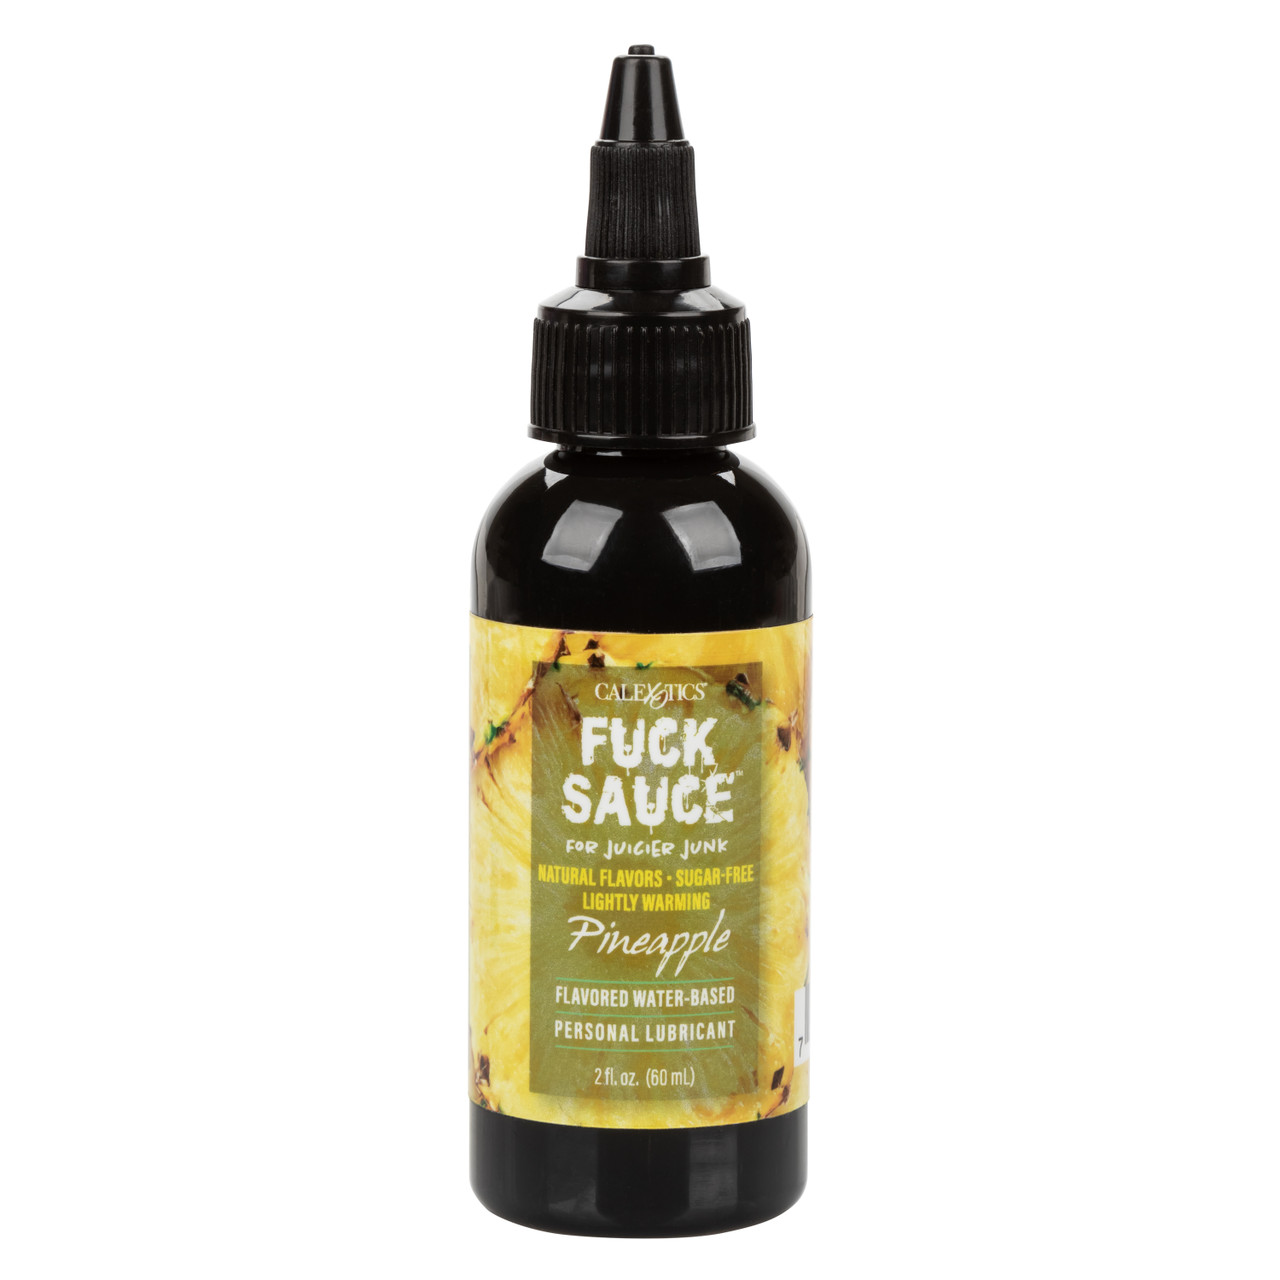 FUCK SAUCE PINEAPPLE FLAVORED LUBE 2 OZ - Click Image to Close